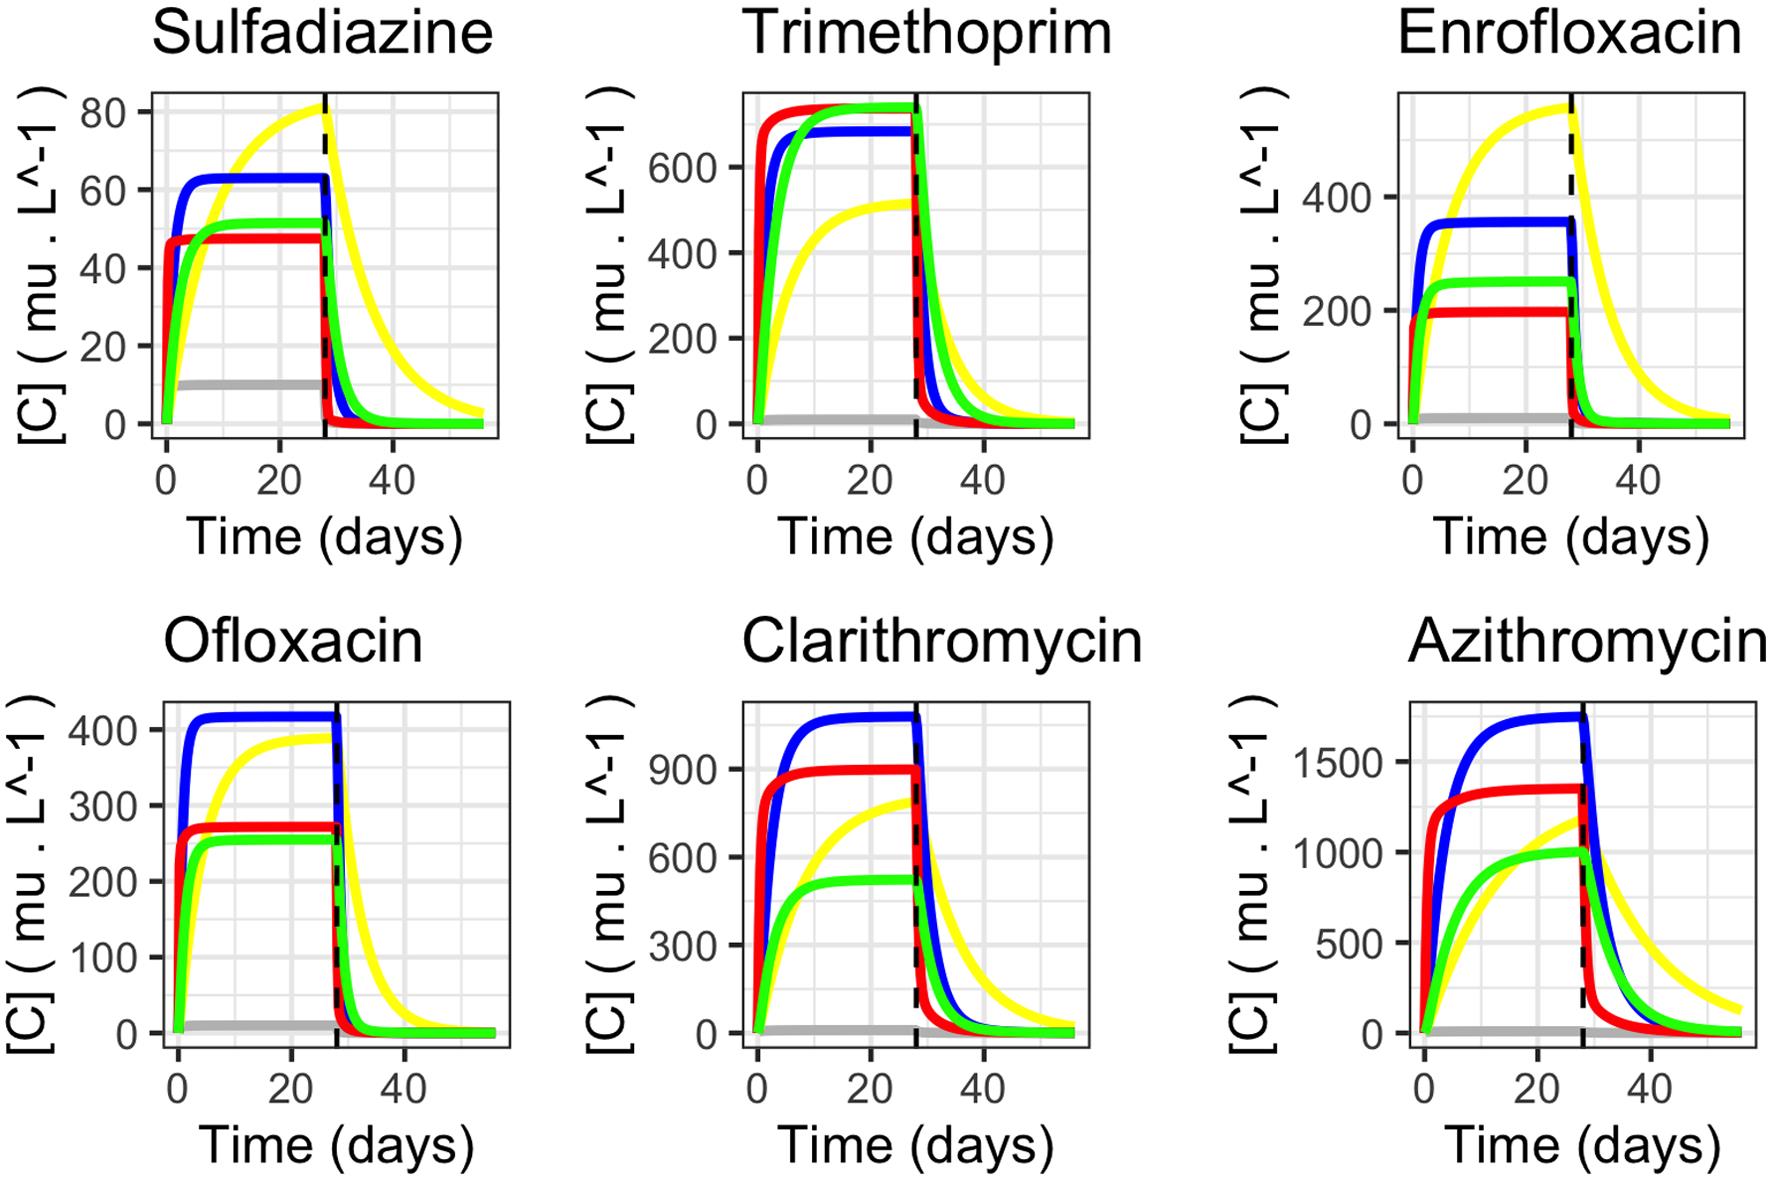 Predicted time course of the median internal concentrations in antibiotics (given on the top legend of each graph) under a constant exposure concentration of 10 <italic>μg</italic>·<italic>L</italic><sup>−1</sup>: in yellow the body wall (<italic>BW</italic>), in blue the mouth (<italic>MH</italic>), in red the respiratory tree (<italic>RT</italic>) and in green the digestive tract (<italic>DT</italic>).